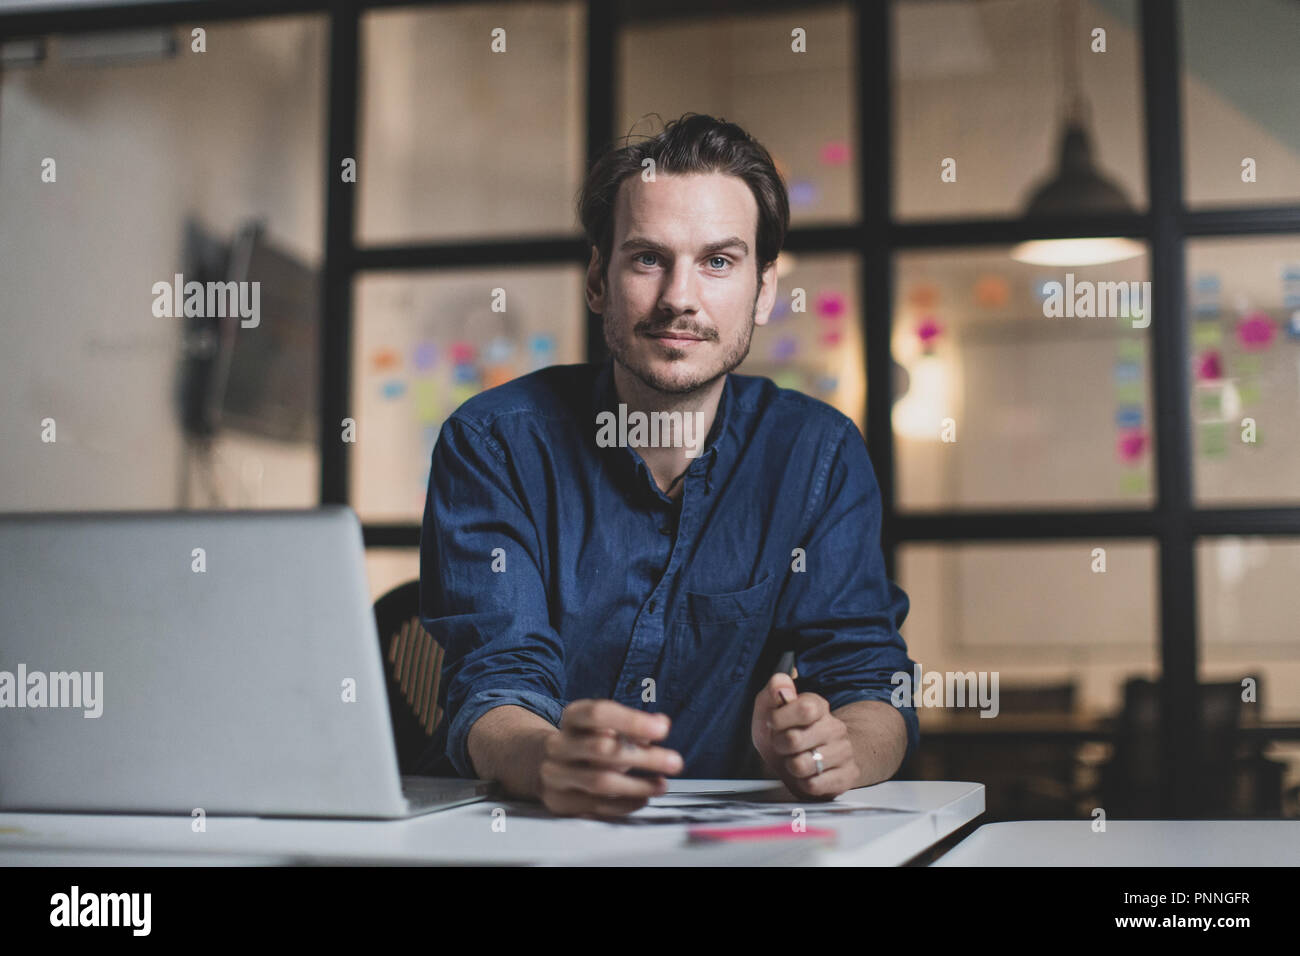 Portrait adult male working late in an office Stock Photo